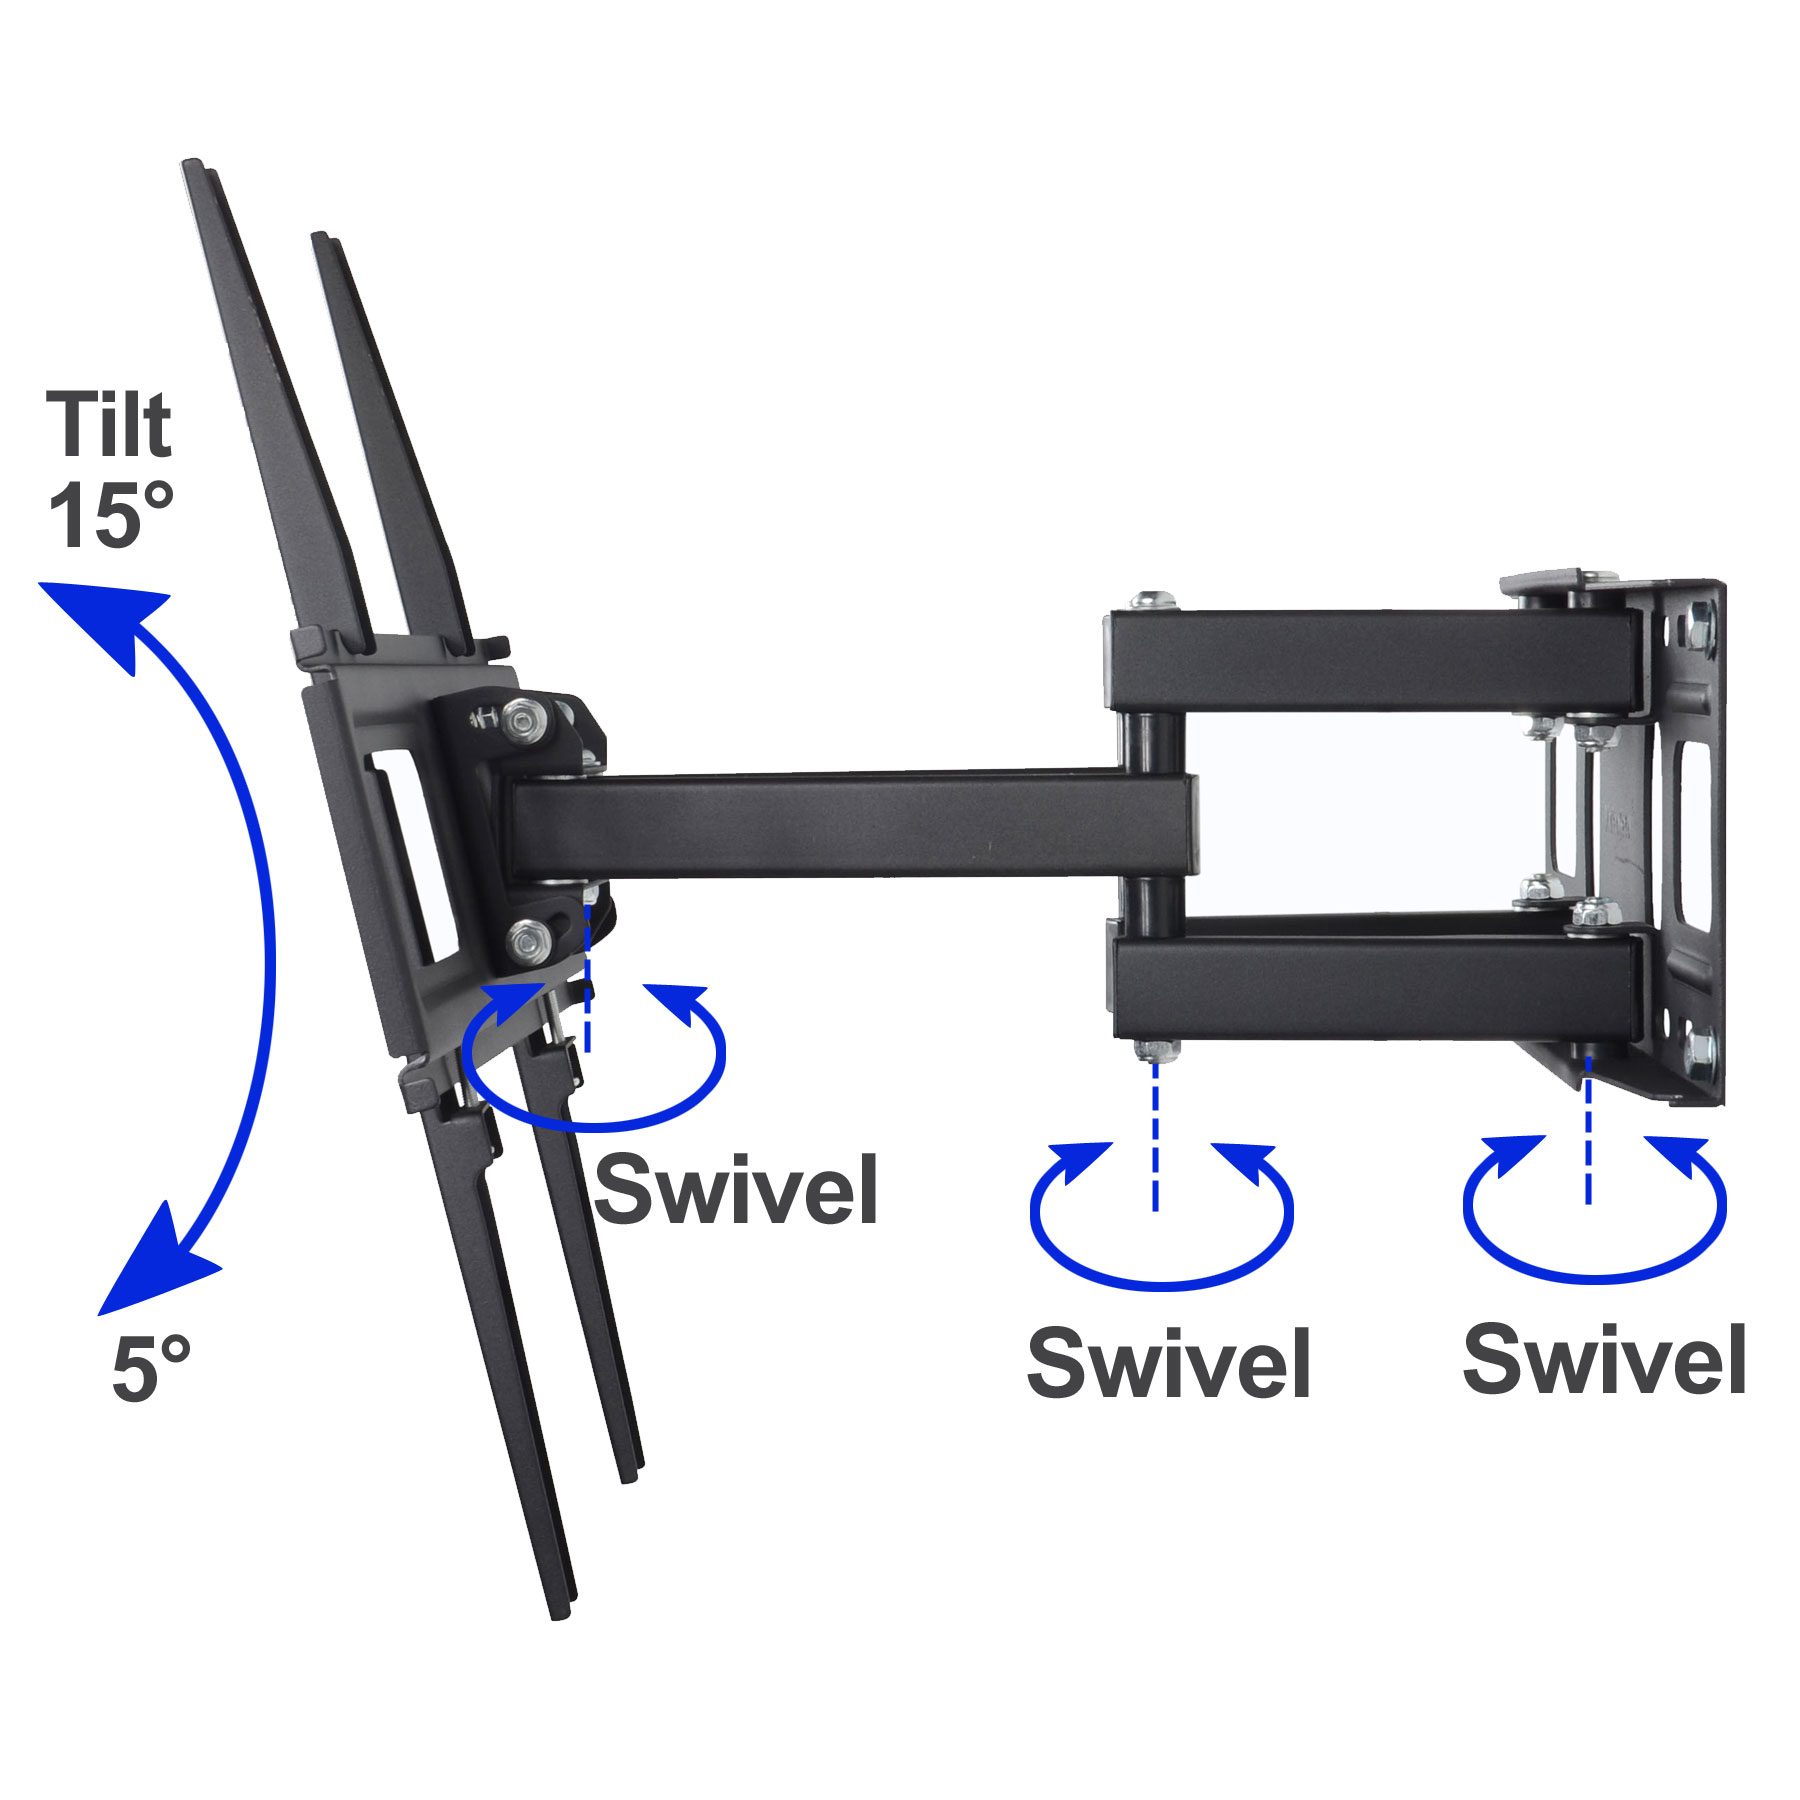 VideoSecu Articulating TV Wall Mount Tilt Swivel Dual Arms Bracket for Most 27 32 39 42 43 46 47 48 50 55 inch LED LCD Plasma HDTV Flat Panel Screen Display, with Full Motion Extend VESA 400x400mm bxk - image 4 of 6